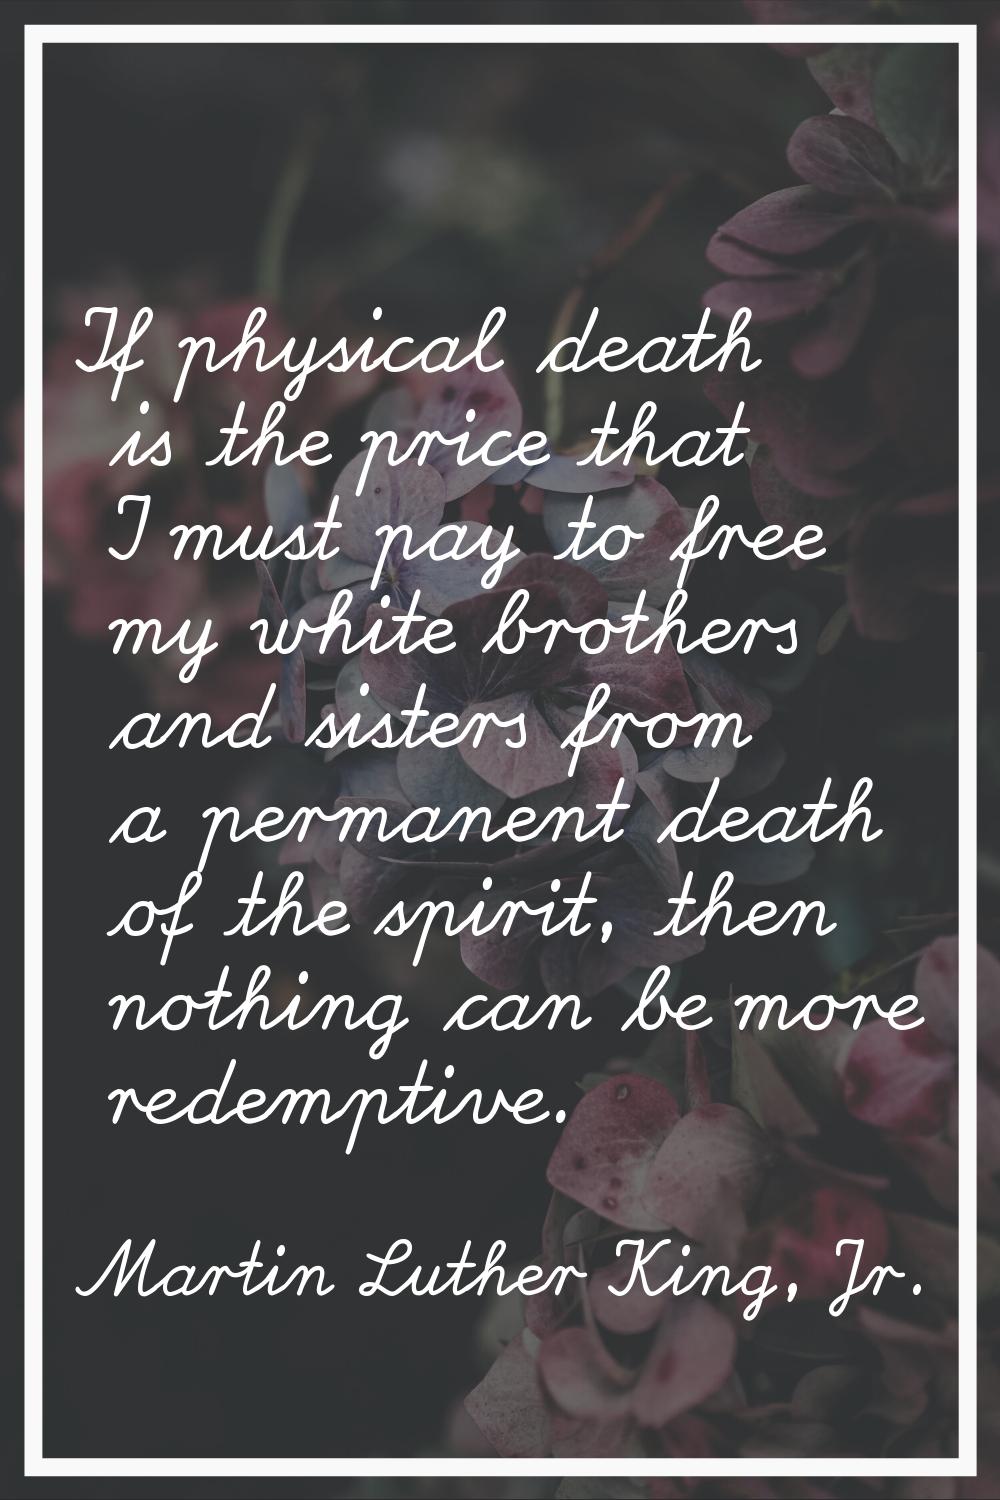 If physical death is the price that I must pay to free my white brothers and sisters from a permane